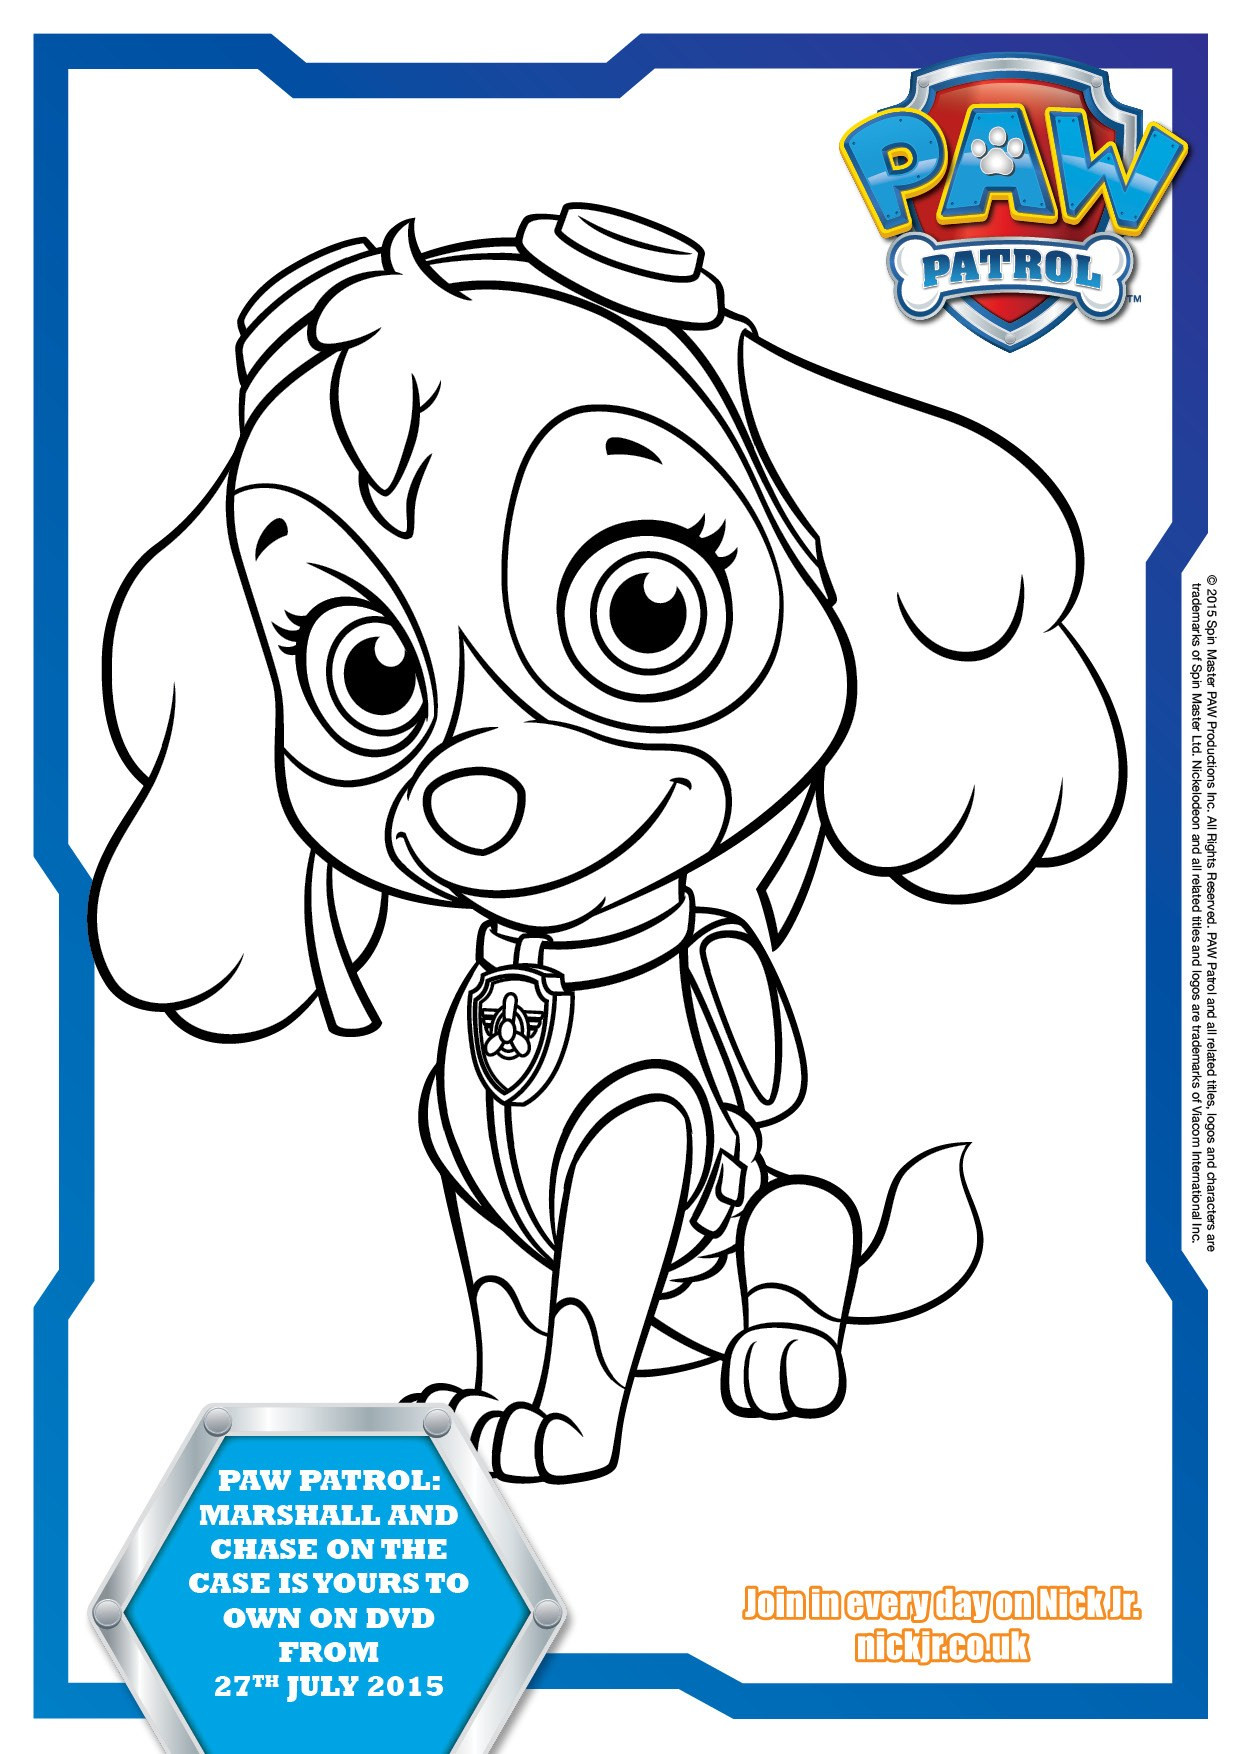 Paw Patrol Printable Coloring Pages
 Paw Patrol Colouring Pages and Activity Sheets In The